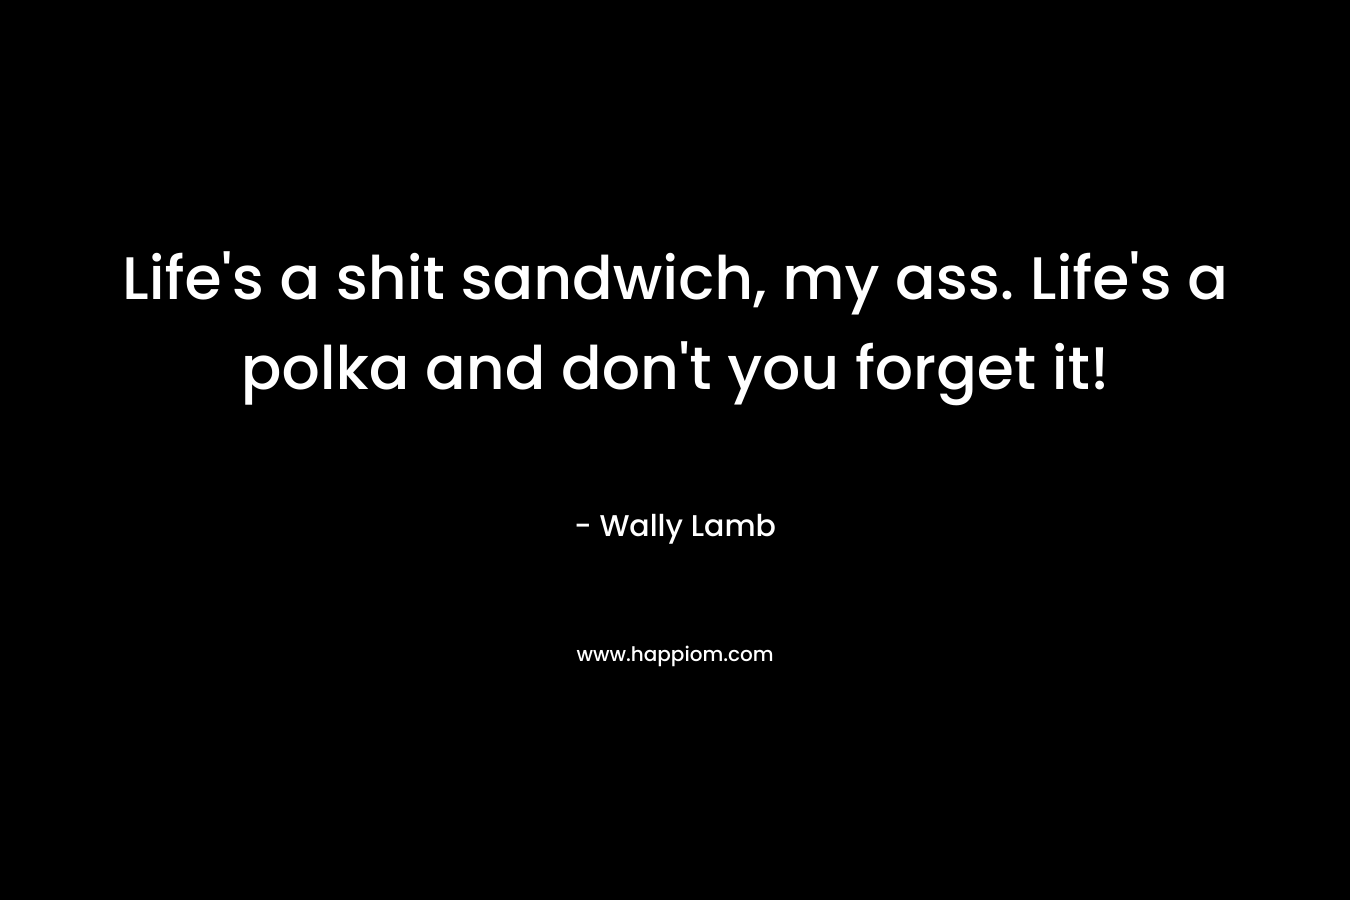 Life’s a shit sandwich, my ass. Life’s a polka and don’t you forget it! – Wally Lamb